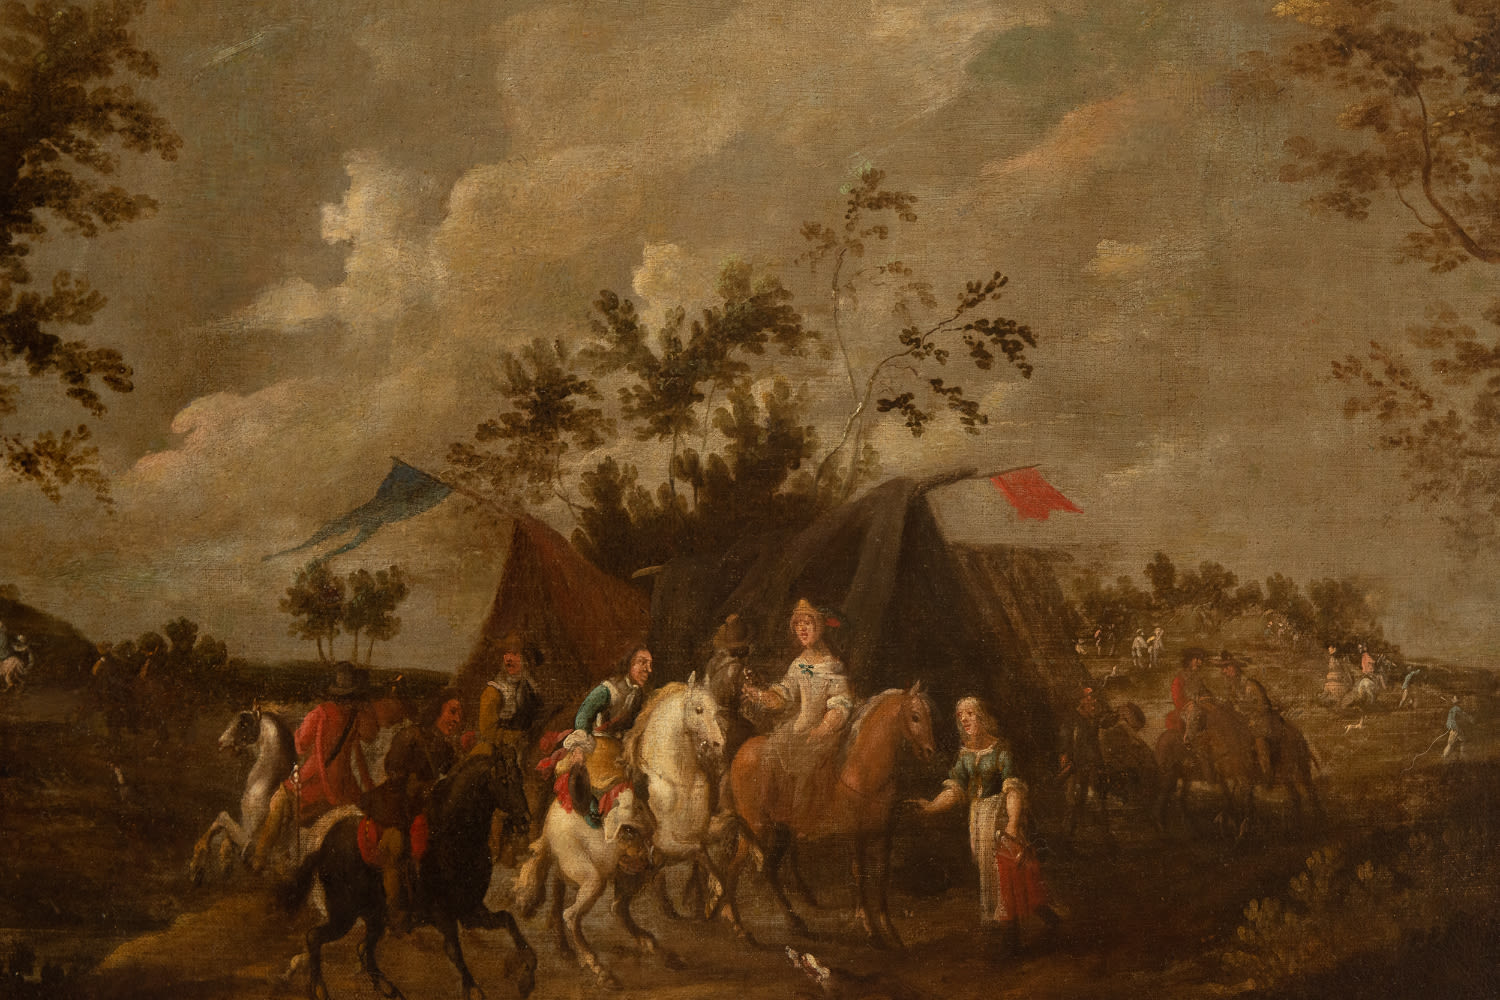 Cavalry scene, Dutch school from the second half of the 17th century - Image 3 of 12